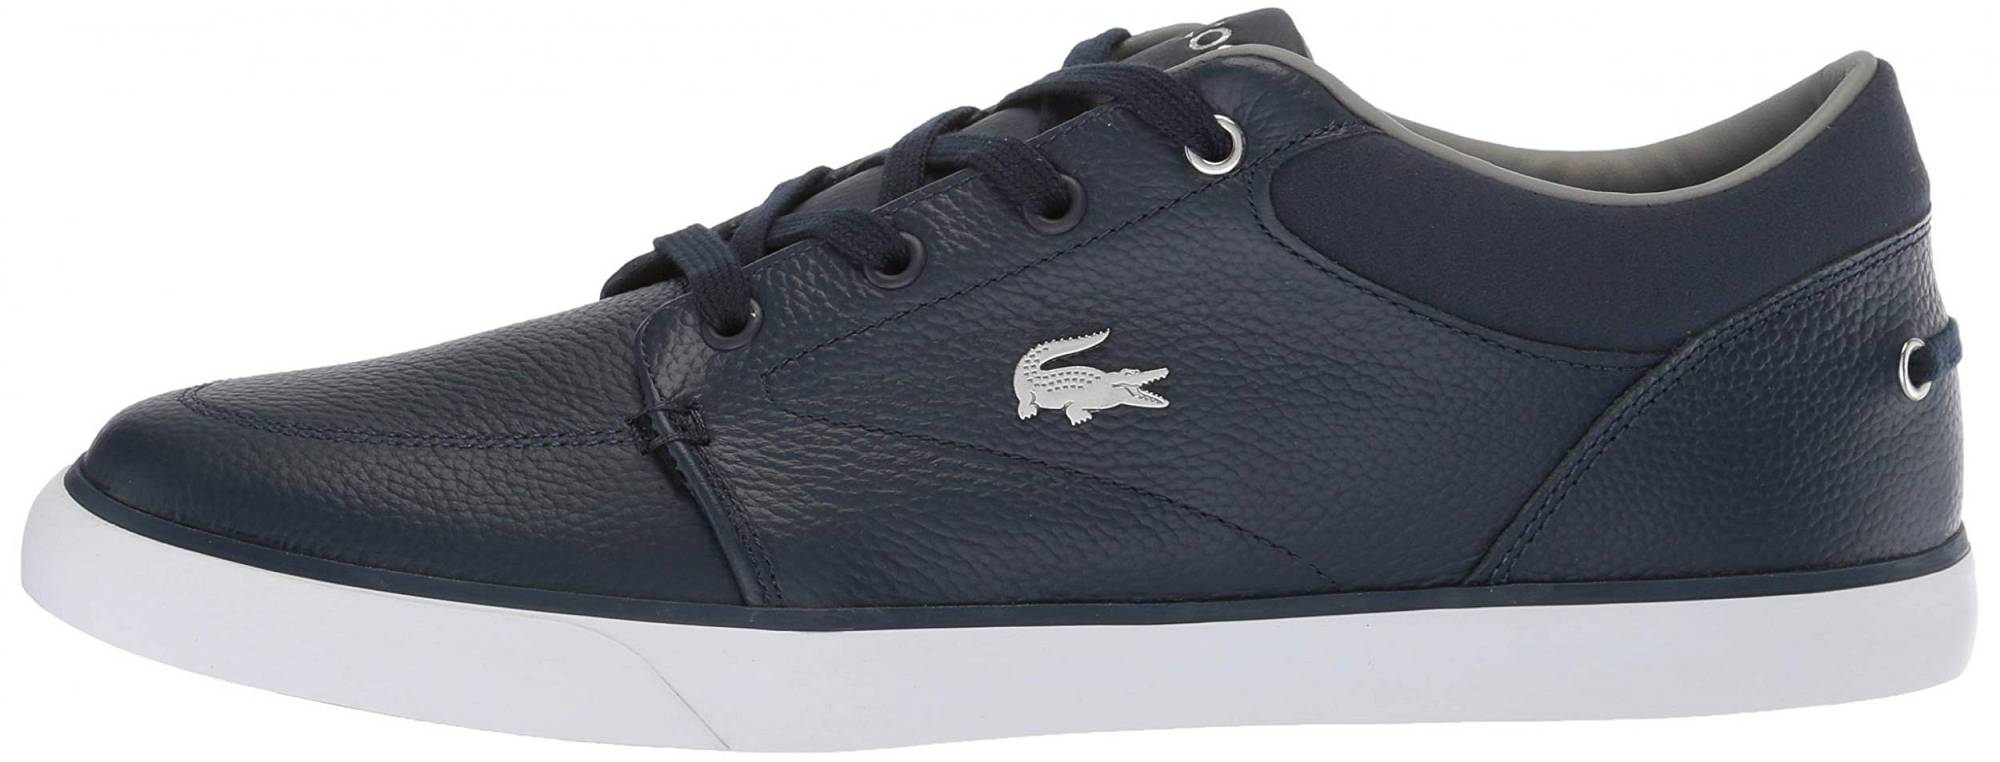 Lacoste Bayliss Sneaker – Shoes Reviews & Reasons To Buy